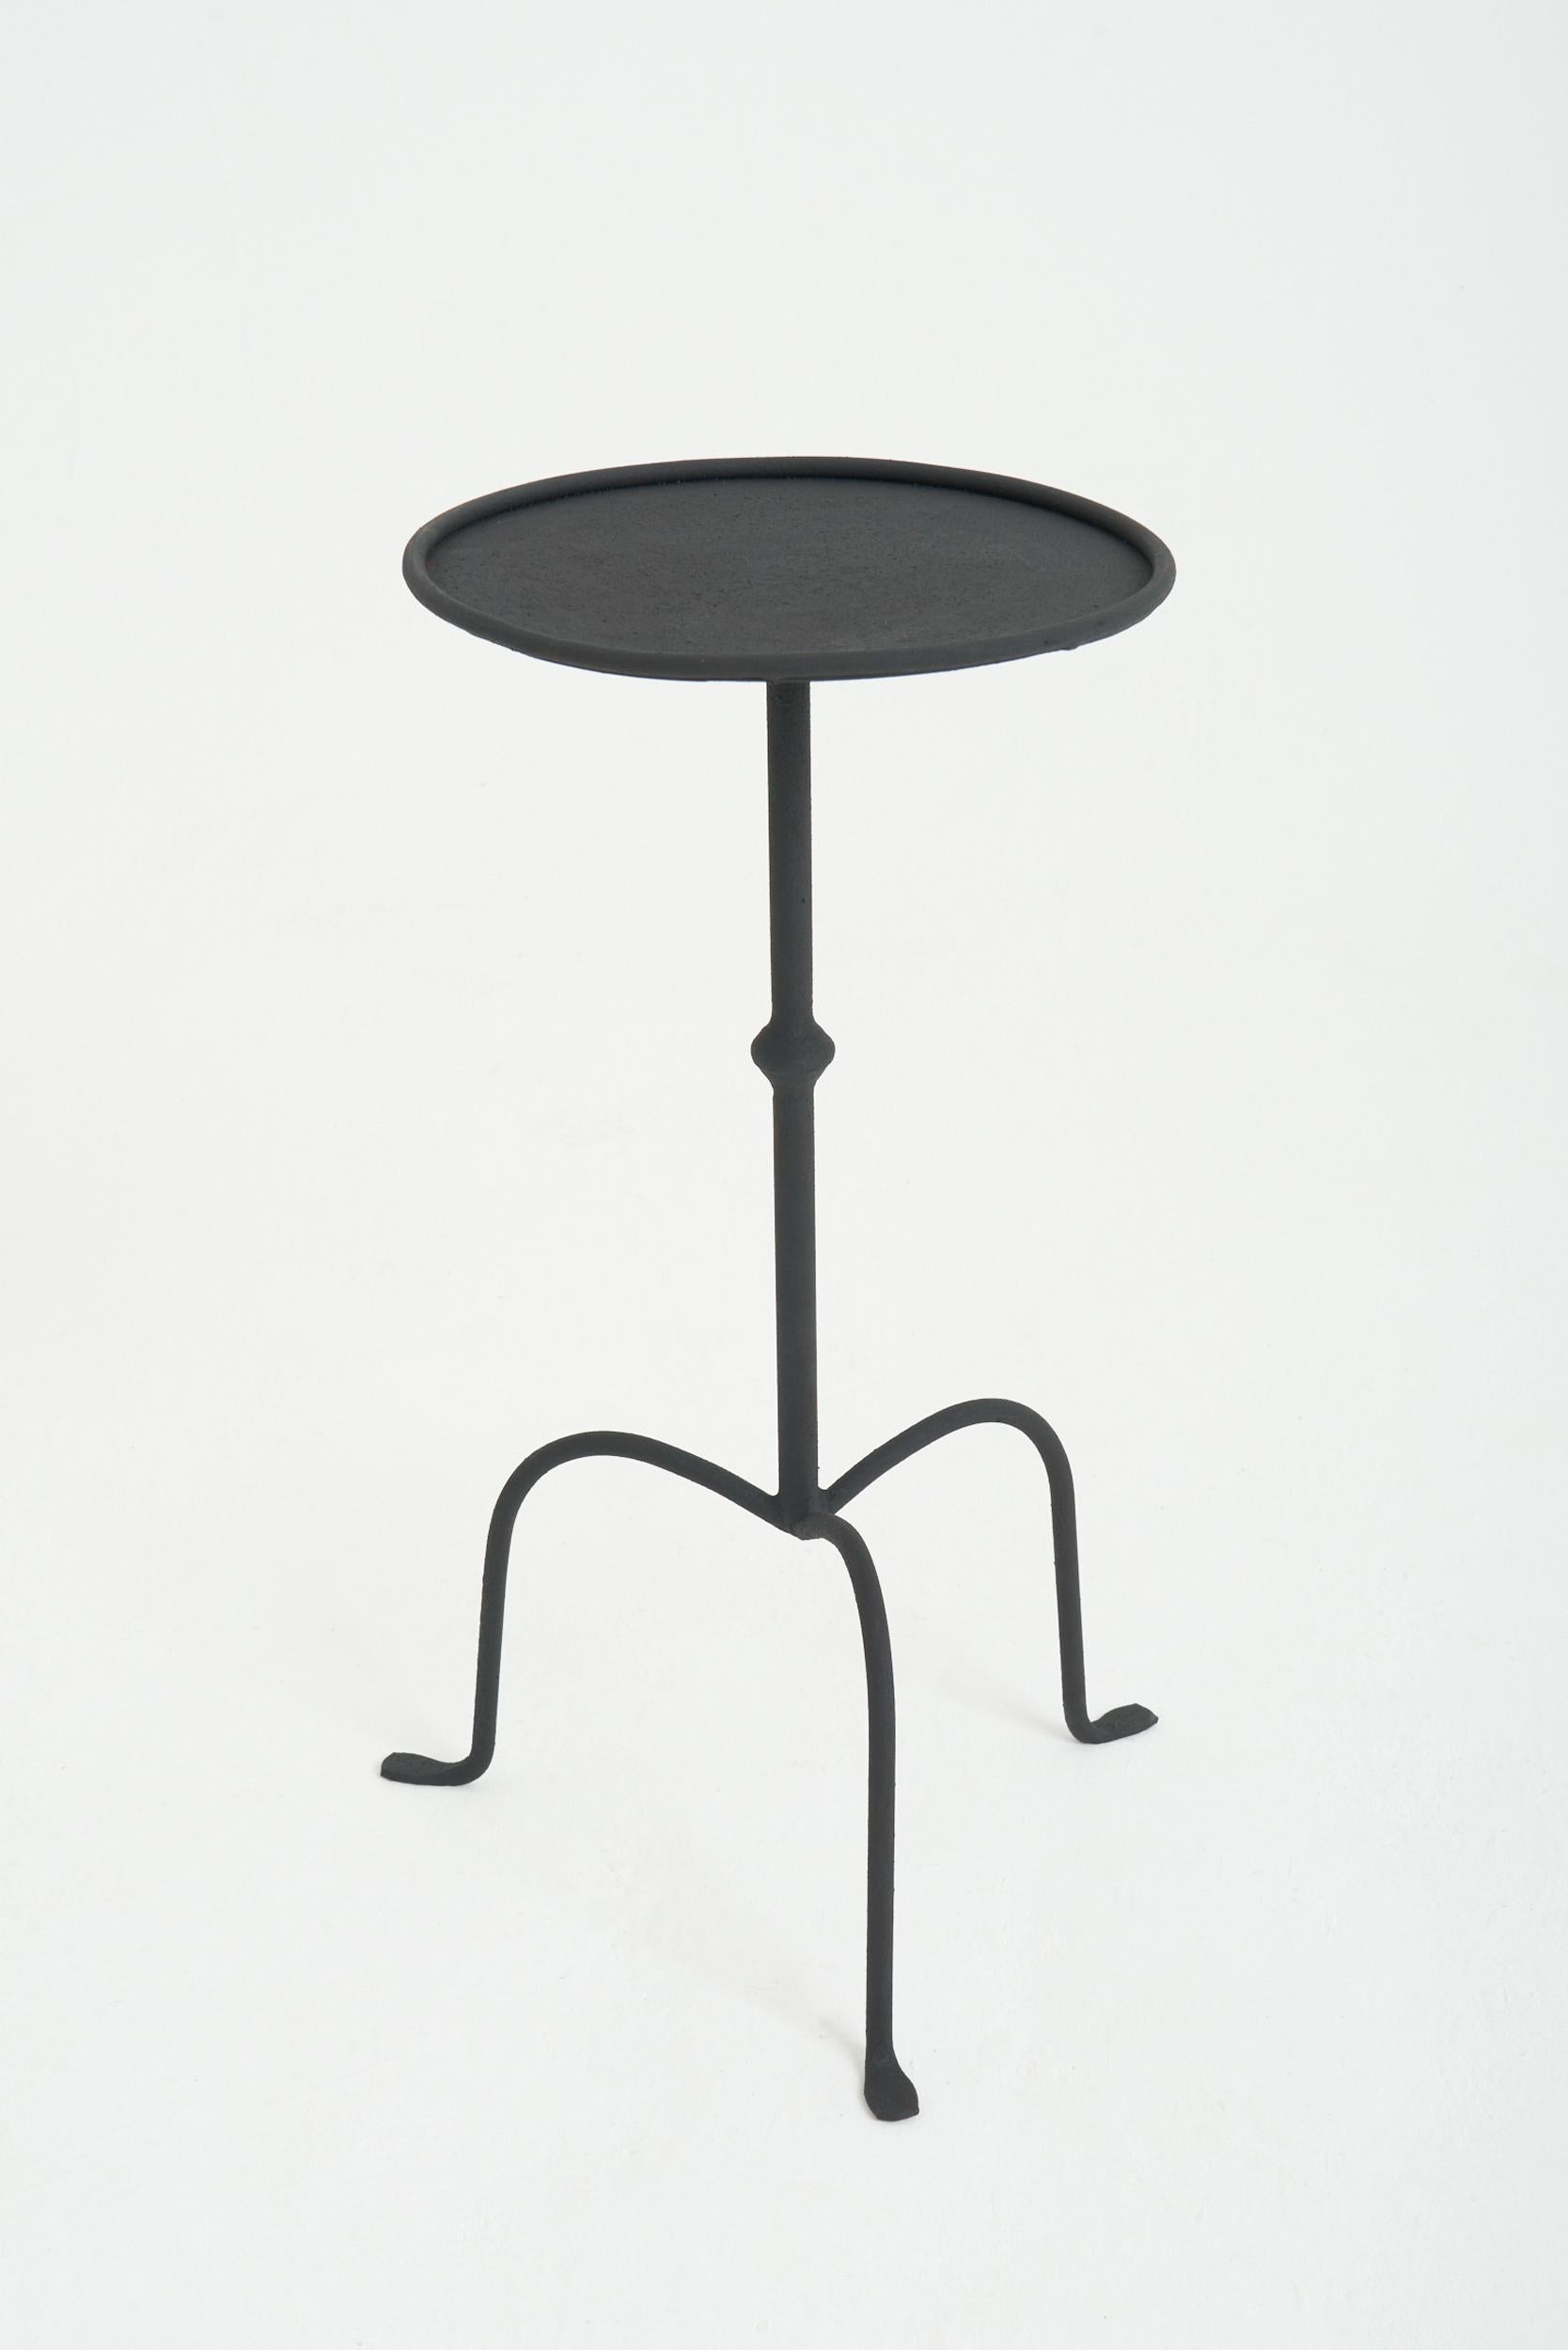 A black patinated wrought iron martini table
Spain, contemporary
58 cm high by 27 cm diameter